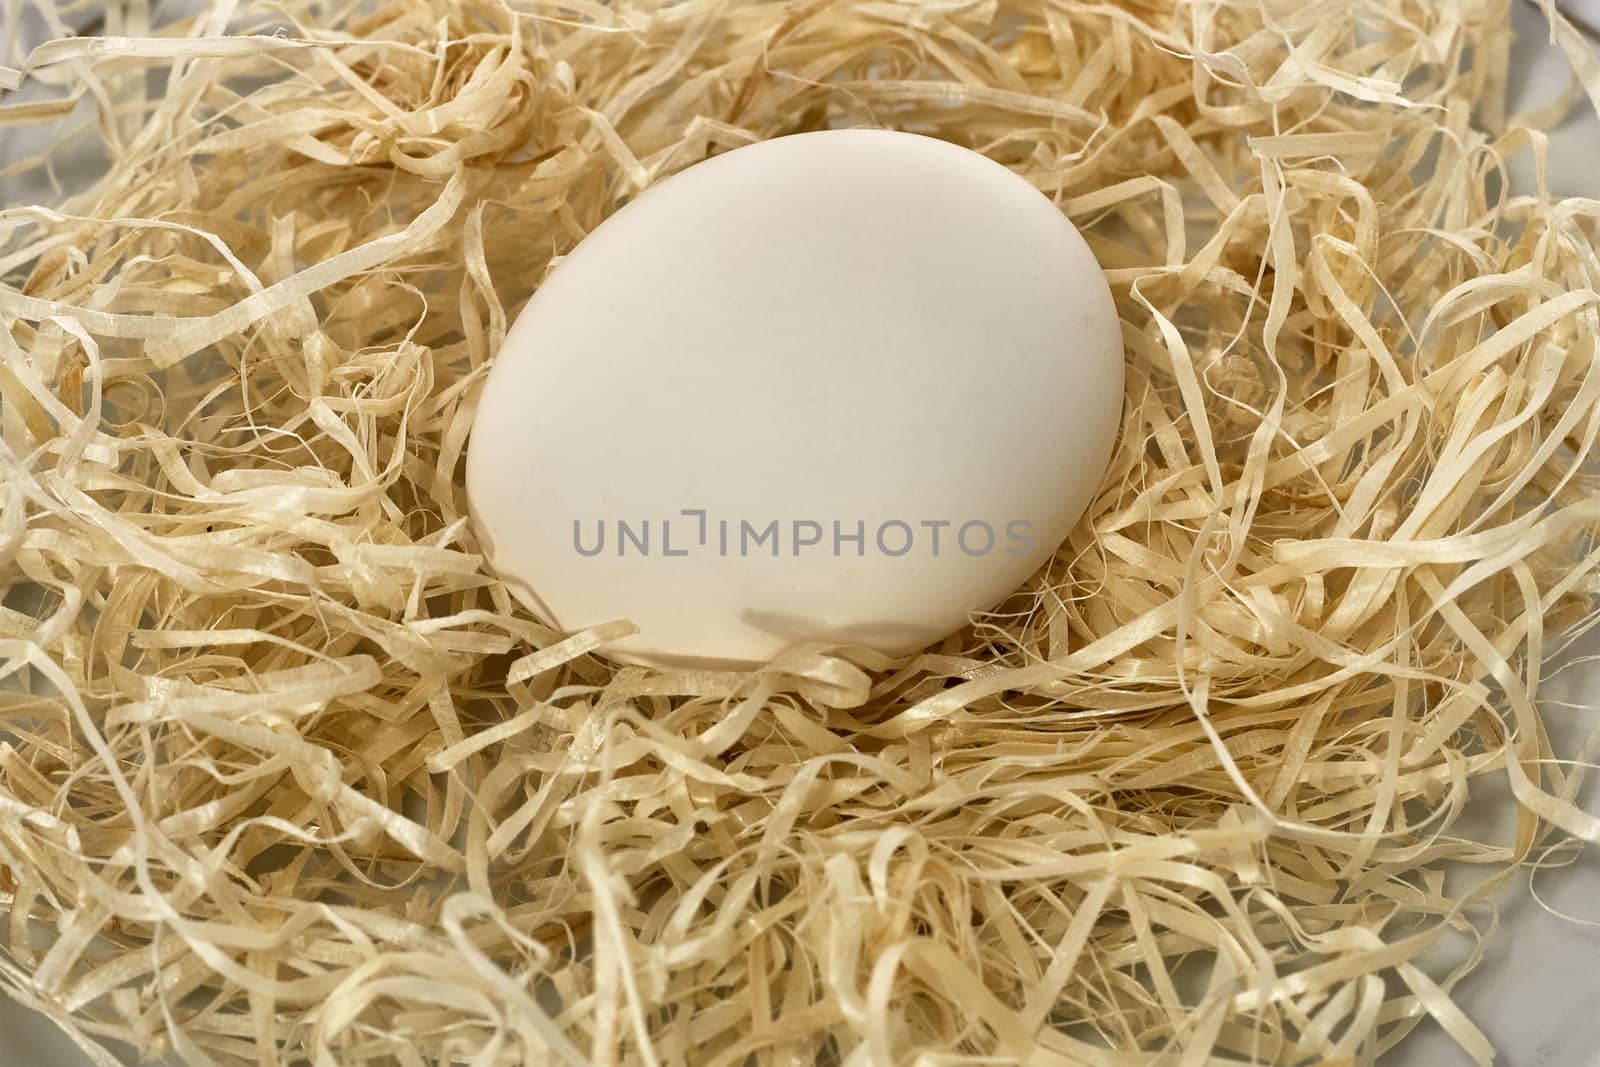 Fresh newly laid hens egg on a nest of straw for eating or using as an ingredient in cooking